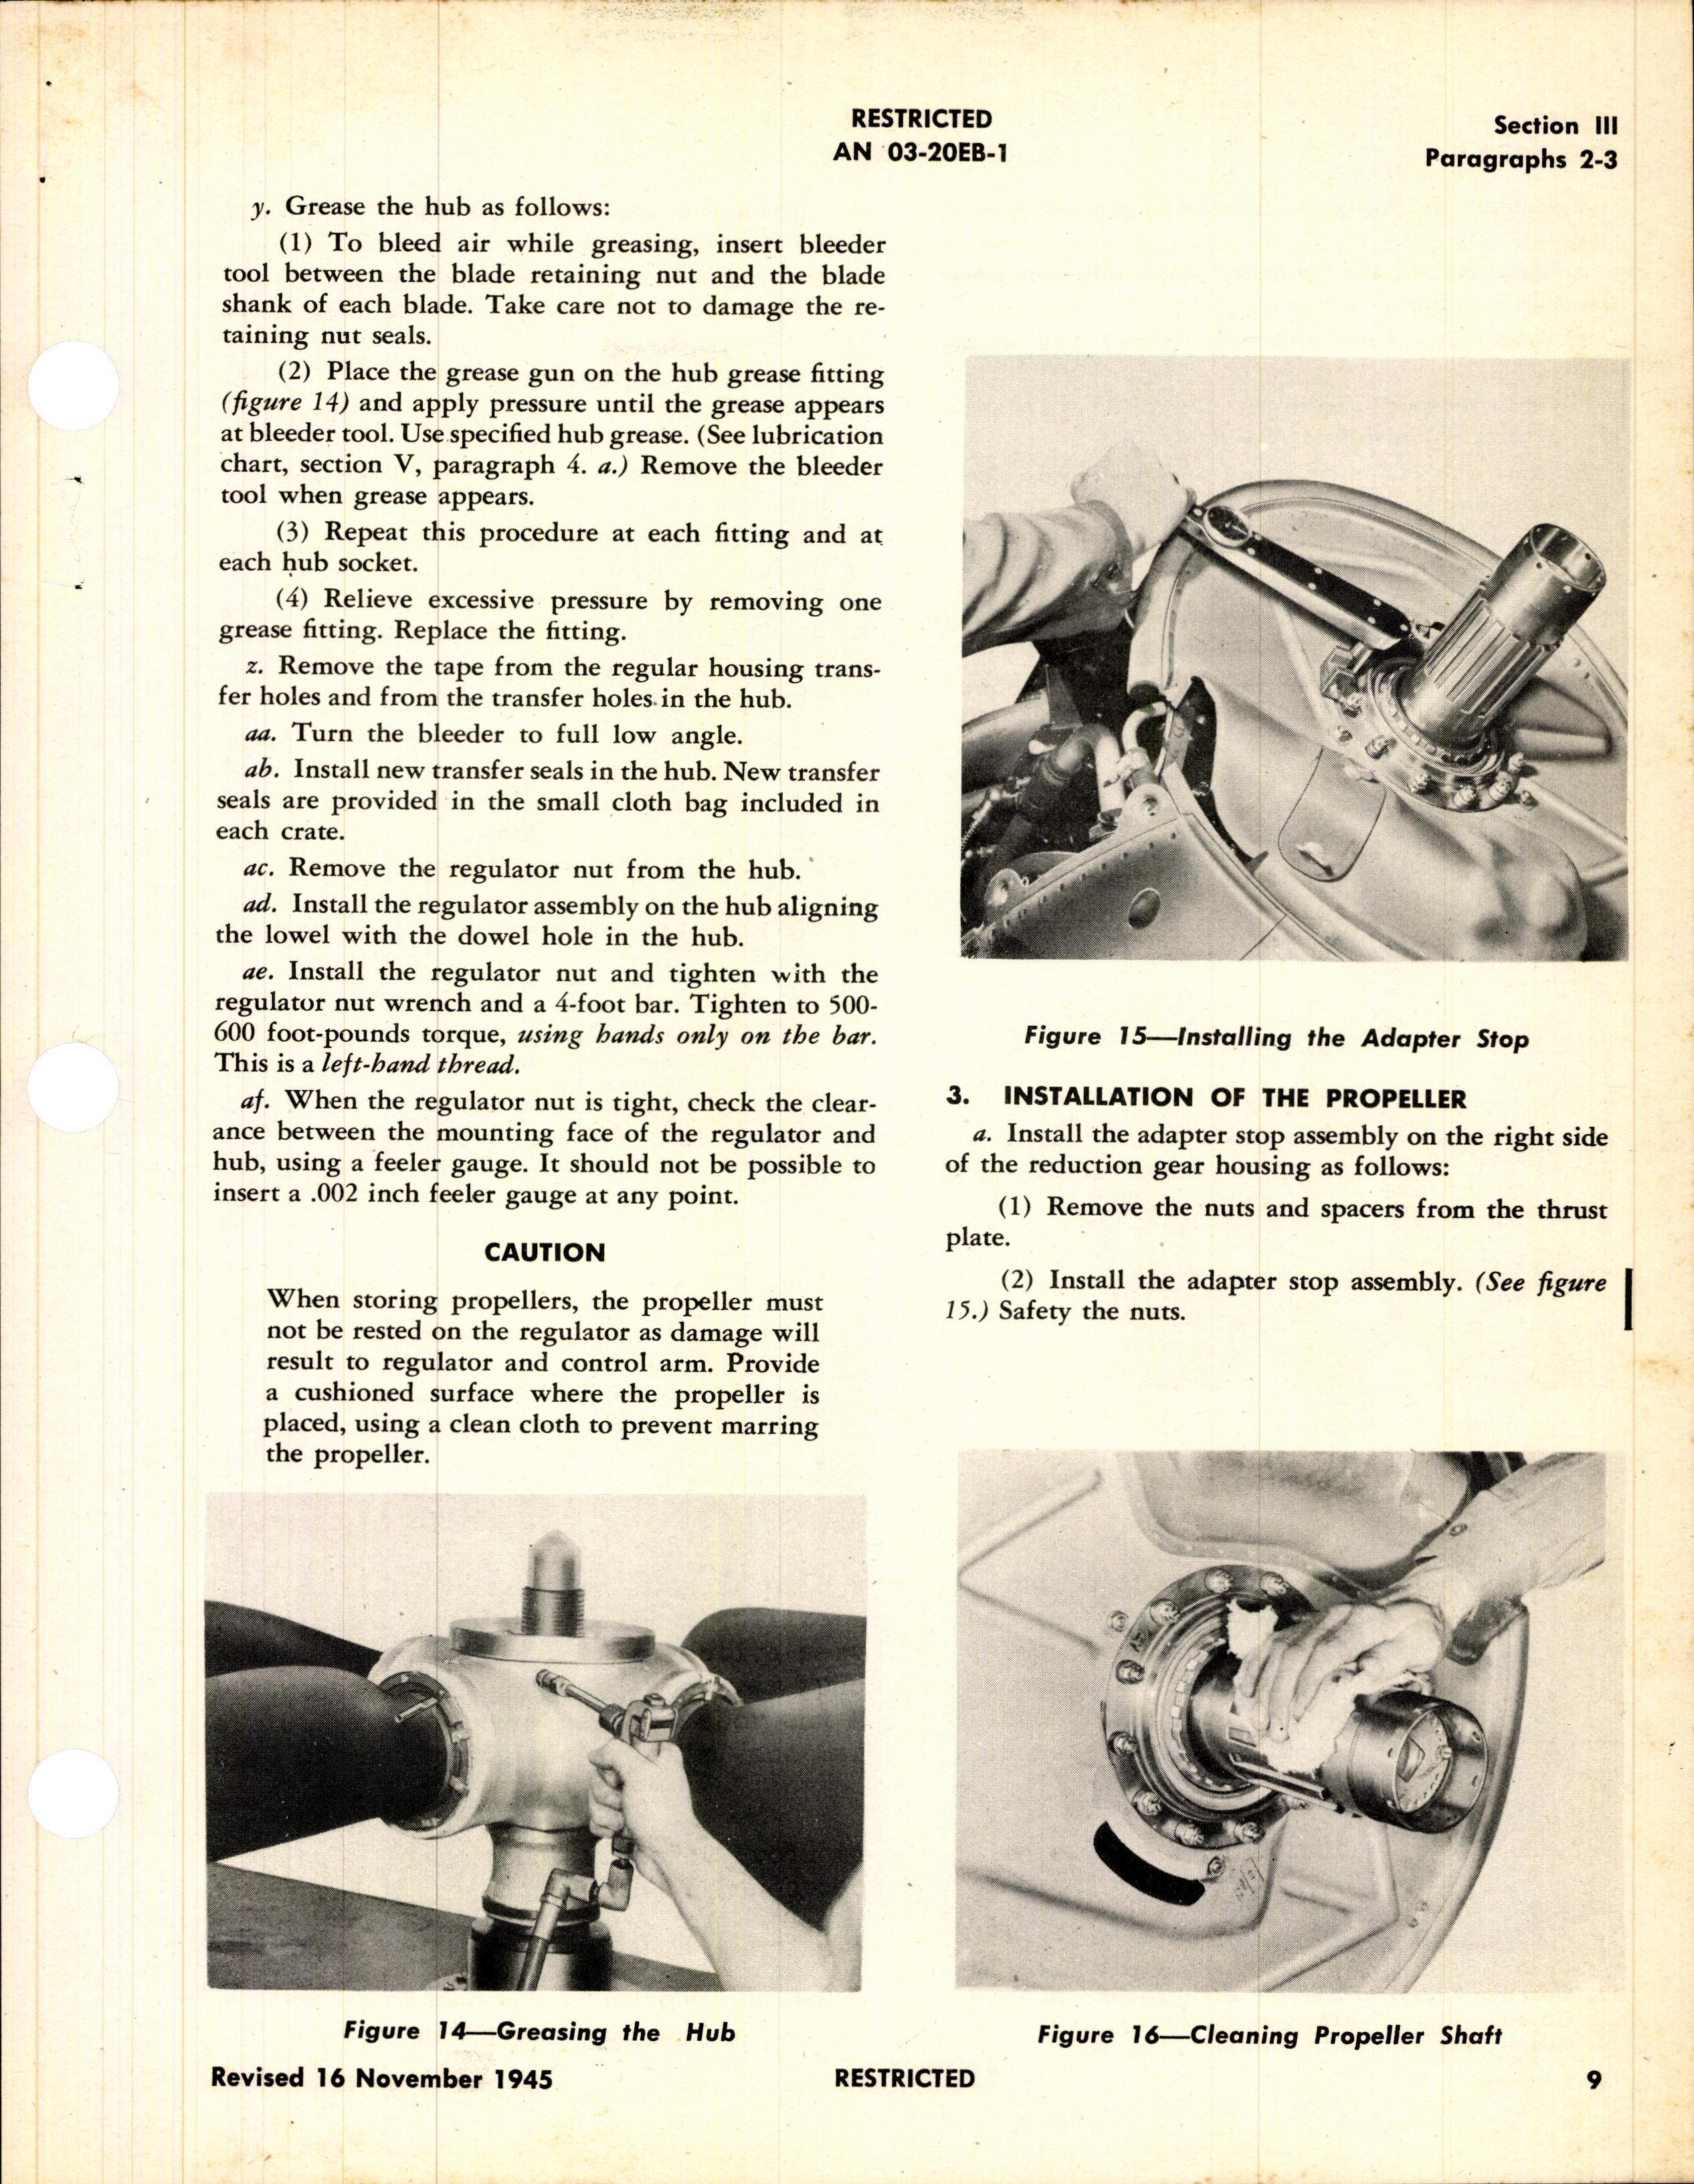 Sample page 7 from AirCorps Library document: Operation, Service, & Overhaul Instructions with Parts Catalog for Hydraulic Controllable Propellers